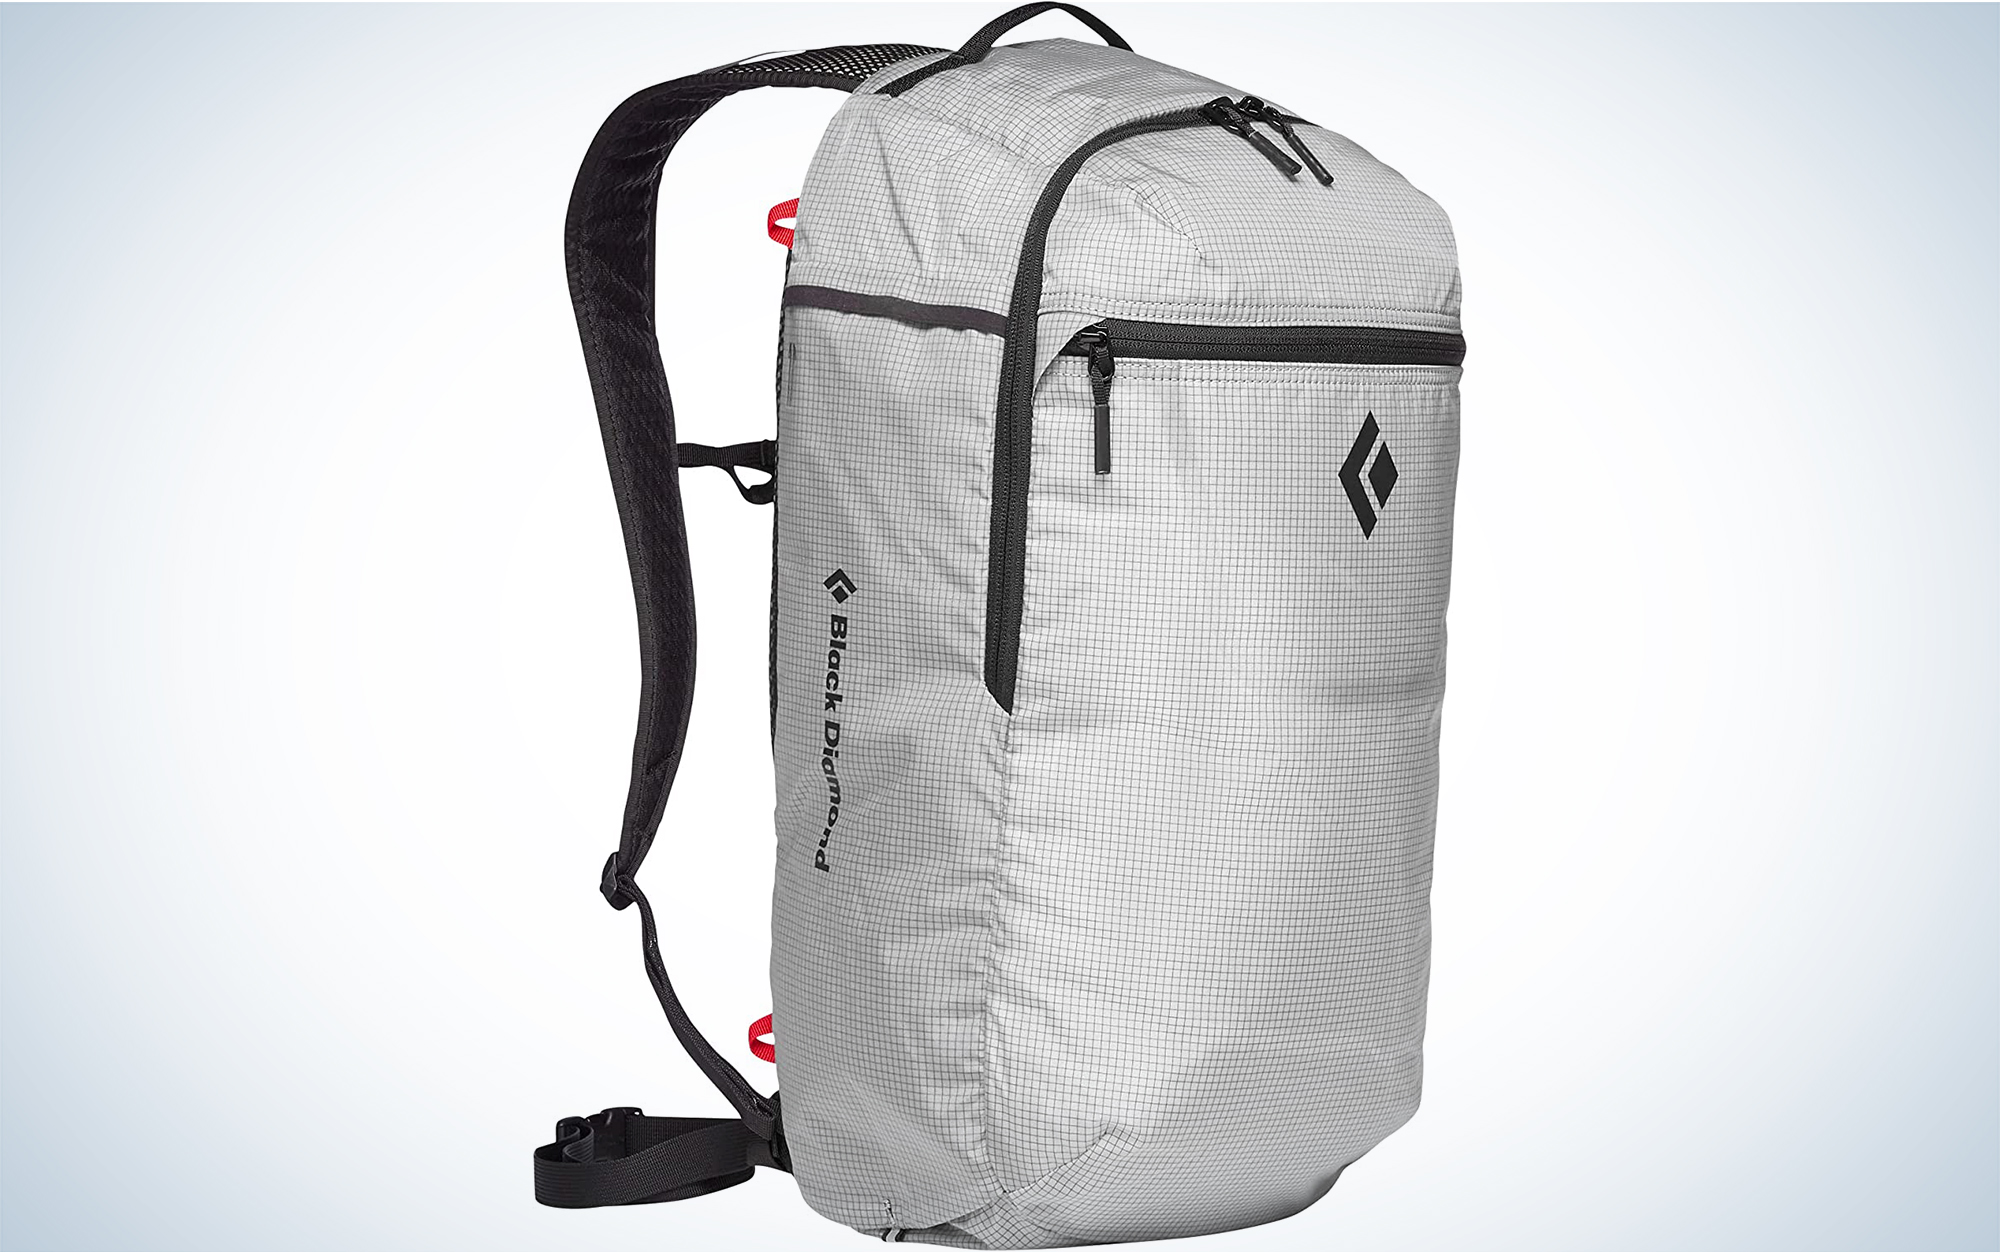 The Black Diamond Trail Zip is one of the best hiking daypacks.